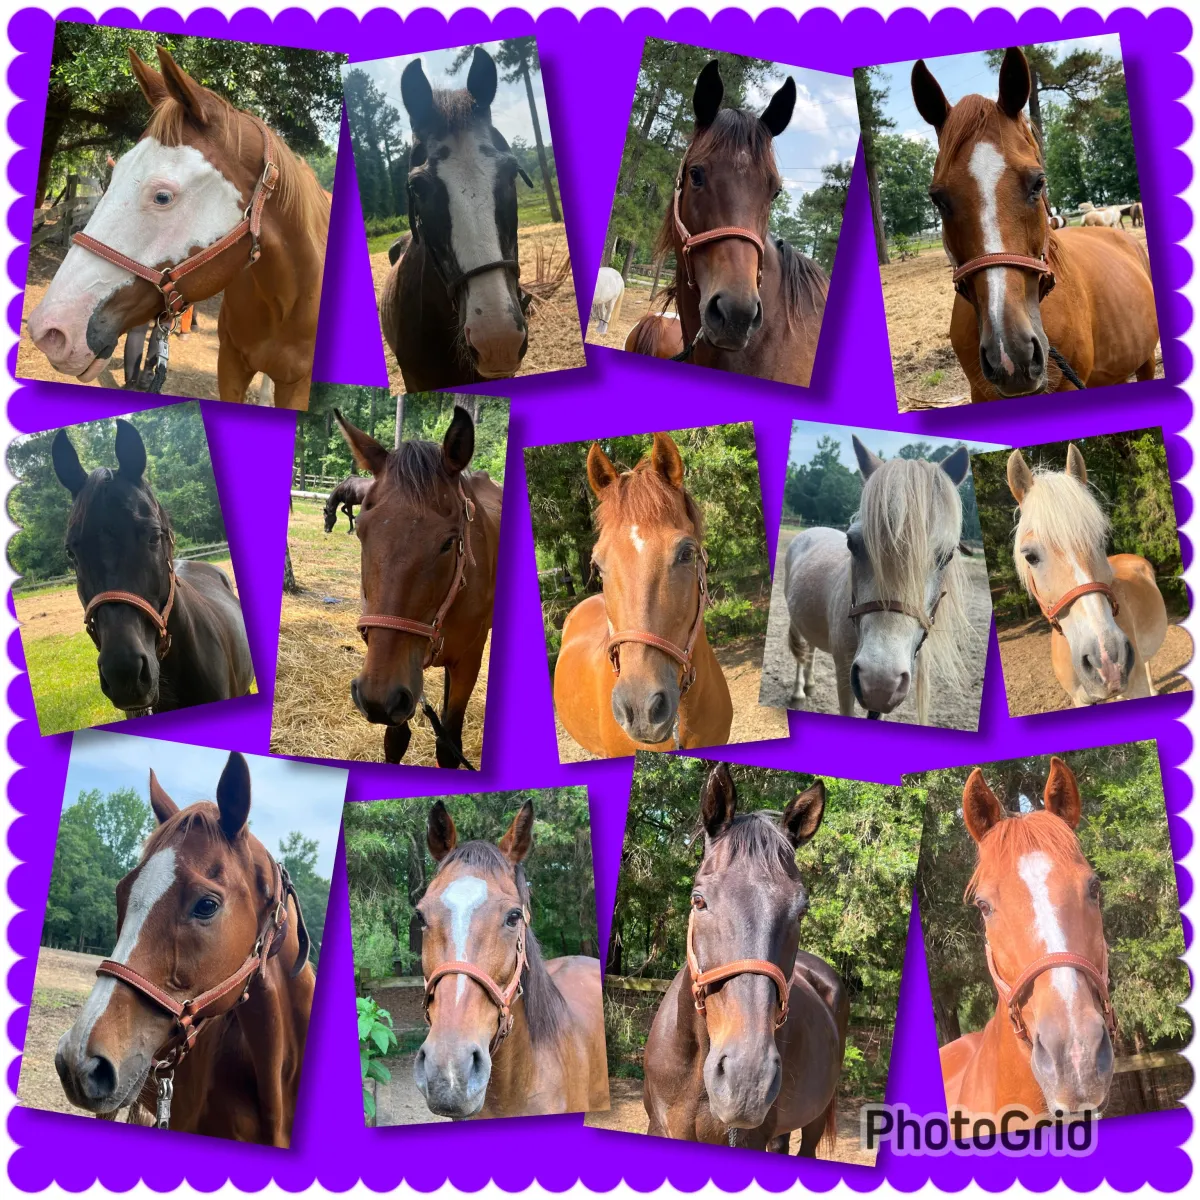 Our horses here at Camp 